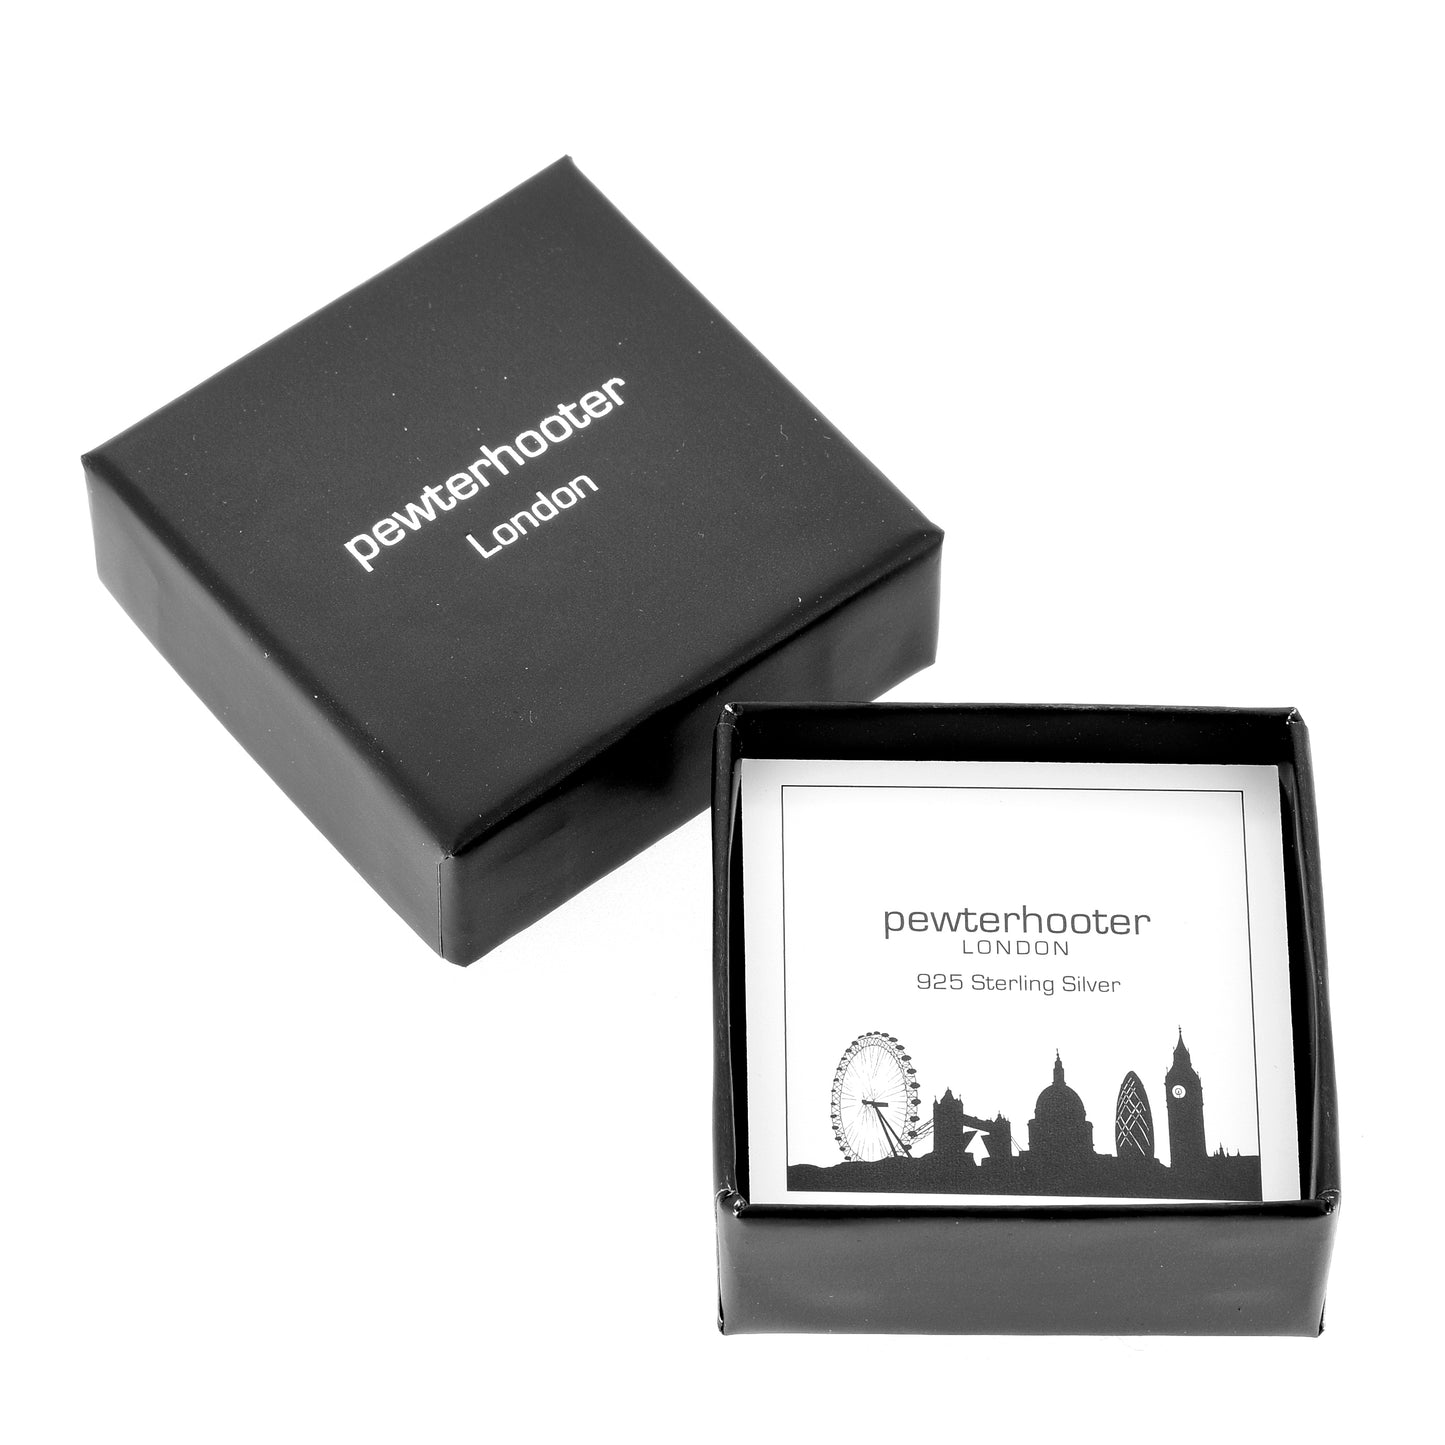 pewterhooter® Women's Classic Collection 925 Sterling silver earrings with brilliant Rainbow Dark crystals, packaged in a gift box for any occasion.